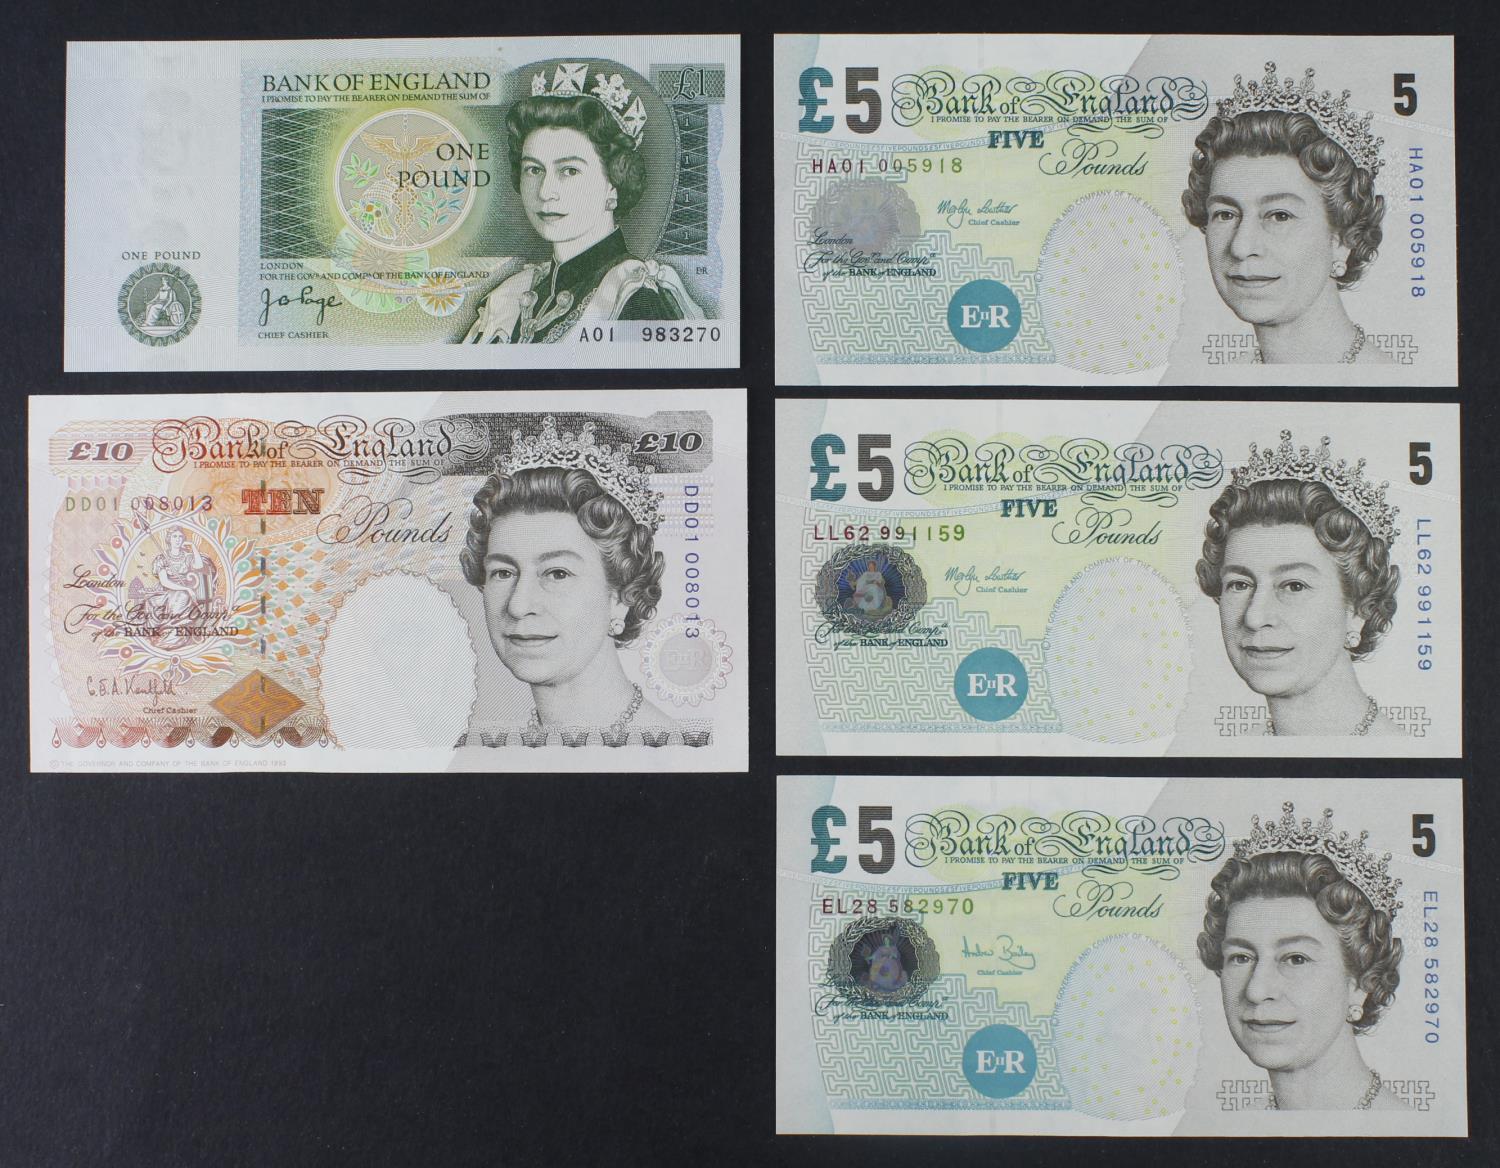 Bank of England (5), a group of special numbers, Page 1 Pound FIRST RUN A01 983270 (B337), Kentfield